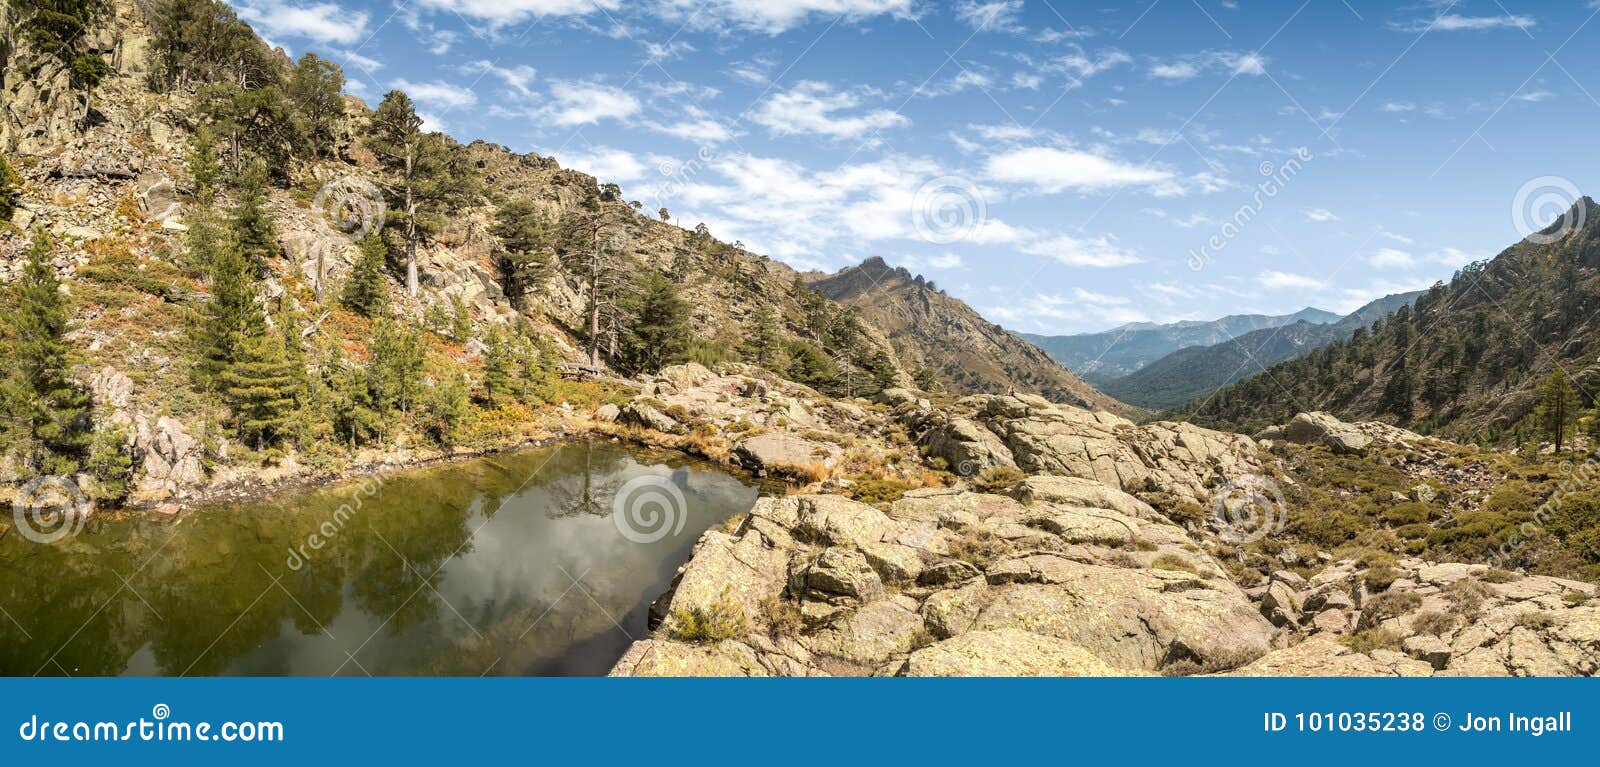 lake at paglia orba in the mountains of corsica